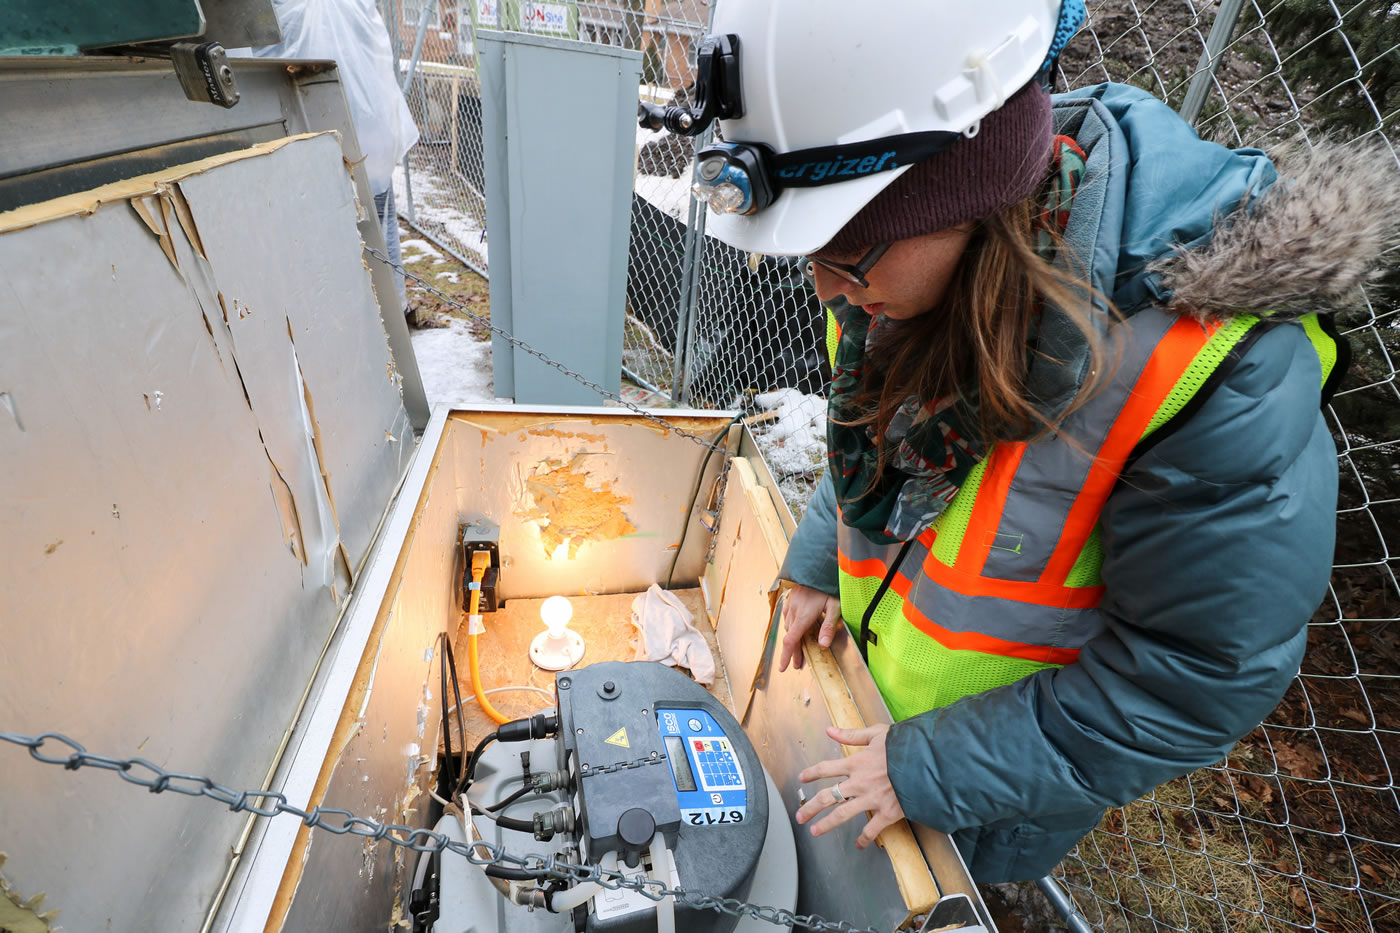 MWMO Environmental Specialist Brittany Faust conducts maintenance on automatic water sampling equipment in February 2016.